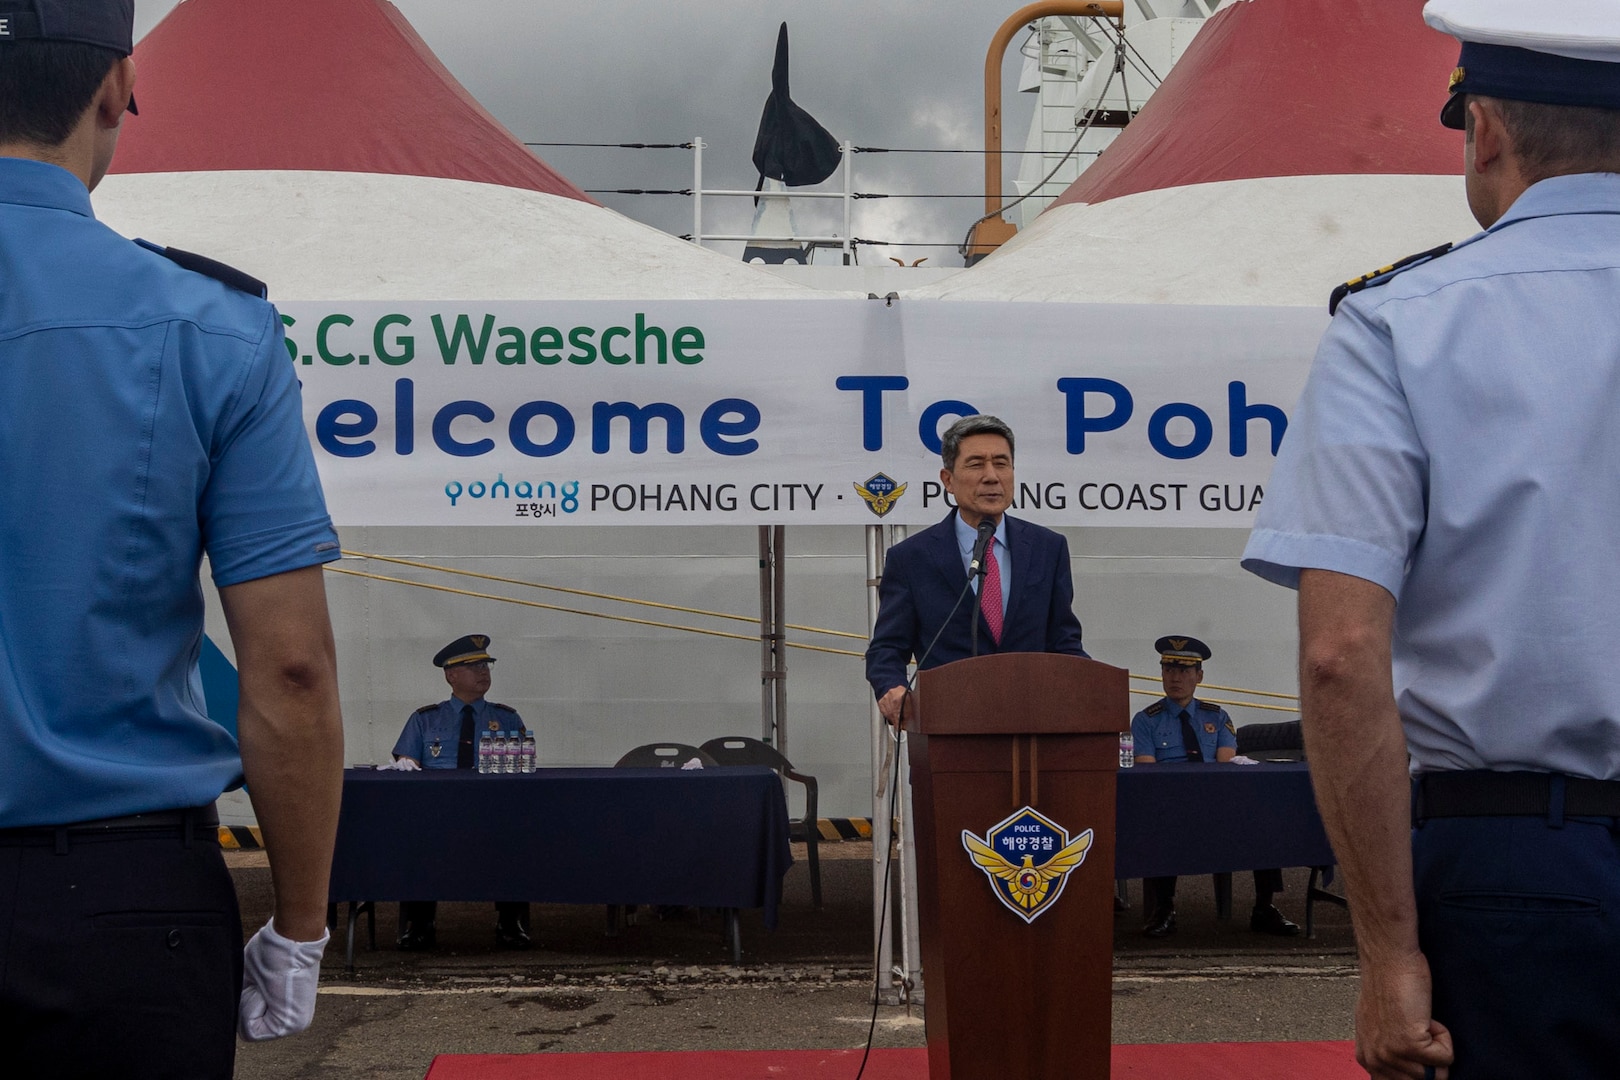 Lee Kang-Deok, the mayor of Pohang, Republic of Korea, gives remarks, during a reception welcoming U.S. Coast Guardsmen assigned to the U.S. Coast Guard Cutter Waesche (WMSL-751) in Pohang, Republic of Korea, June 9, 2024. The Waesche’s arrival marked the first visit by a U.S. Coast Guard ship to Pohang, which was marked with an opening ceremony between United States and Korea Coast Guardsmen. Waesche is the second U.S. Coast Guard National Security Cutter deployed to the Indo-Pacific in 2024. Waesche is assigned to Destroyer Squadron (DESRON) 15, the Navy’s largest DESRON and the U.S. 7th Fleet’s principal surface force. Coast Guard cutters routinely deploy to the region to engage with partner nations to ensure a free and open Indo-Pacific. (U.S. Marine Corps photo by Cpl. Elijah Murphy)